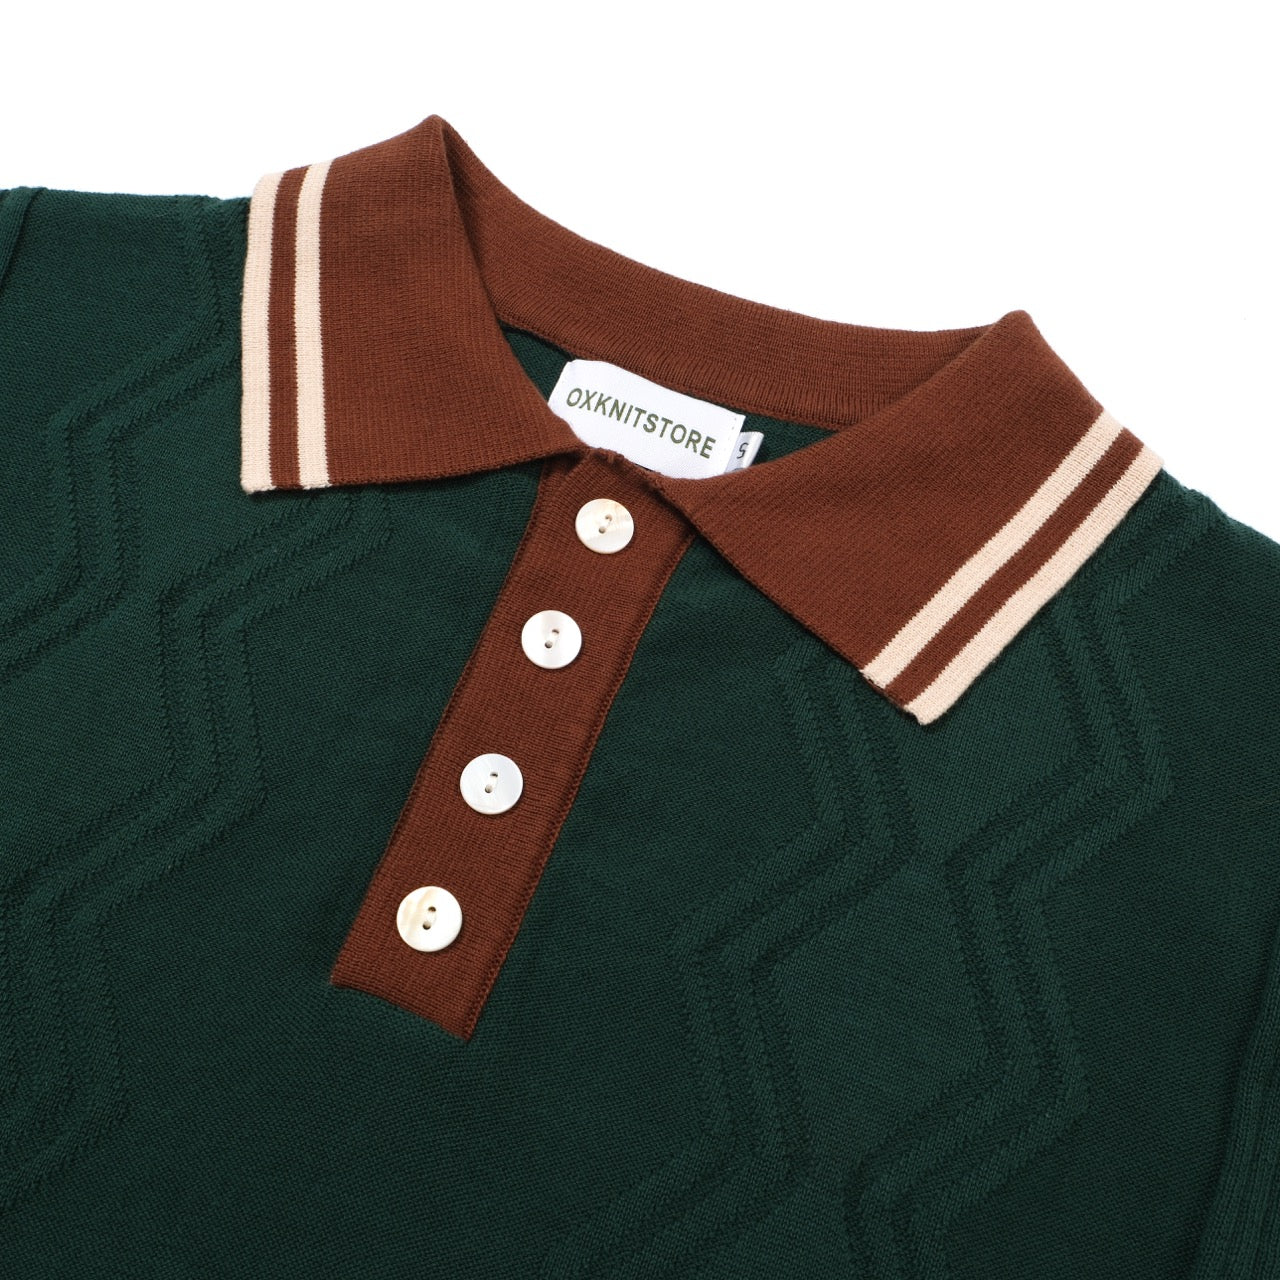 OXKNIT Men Vintage Clothing 1960s Mod Style Green & Red Brown Retro Polo Knitted Wear